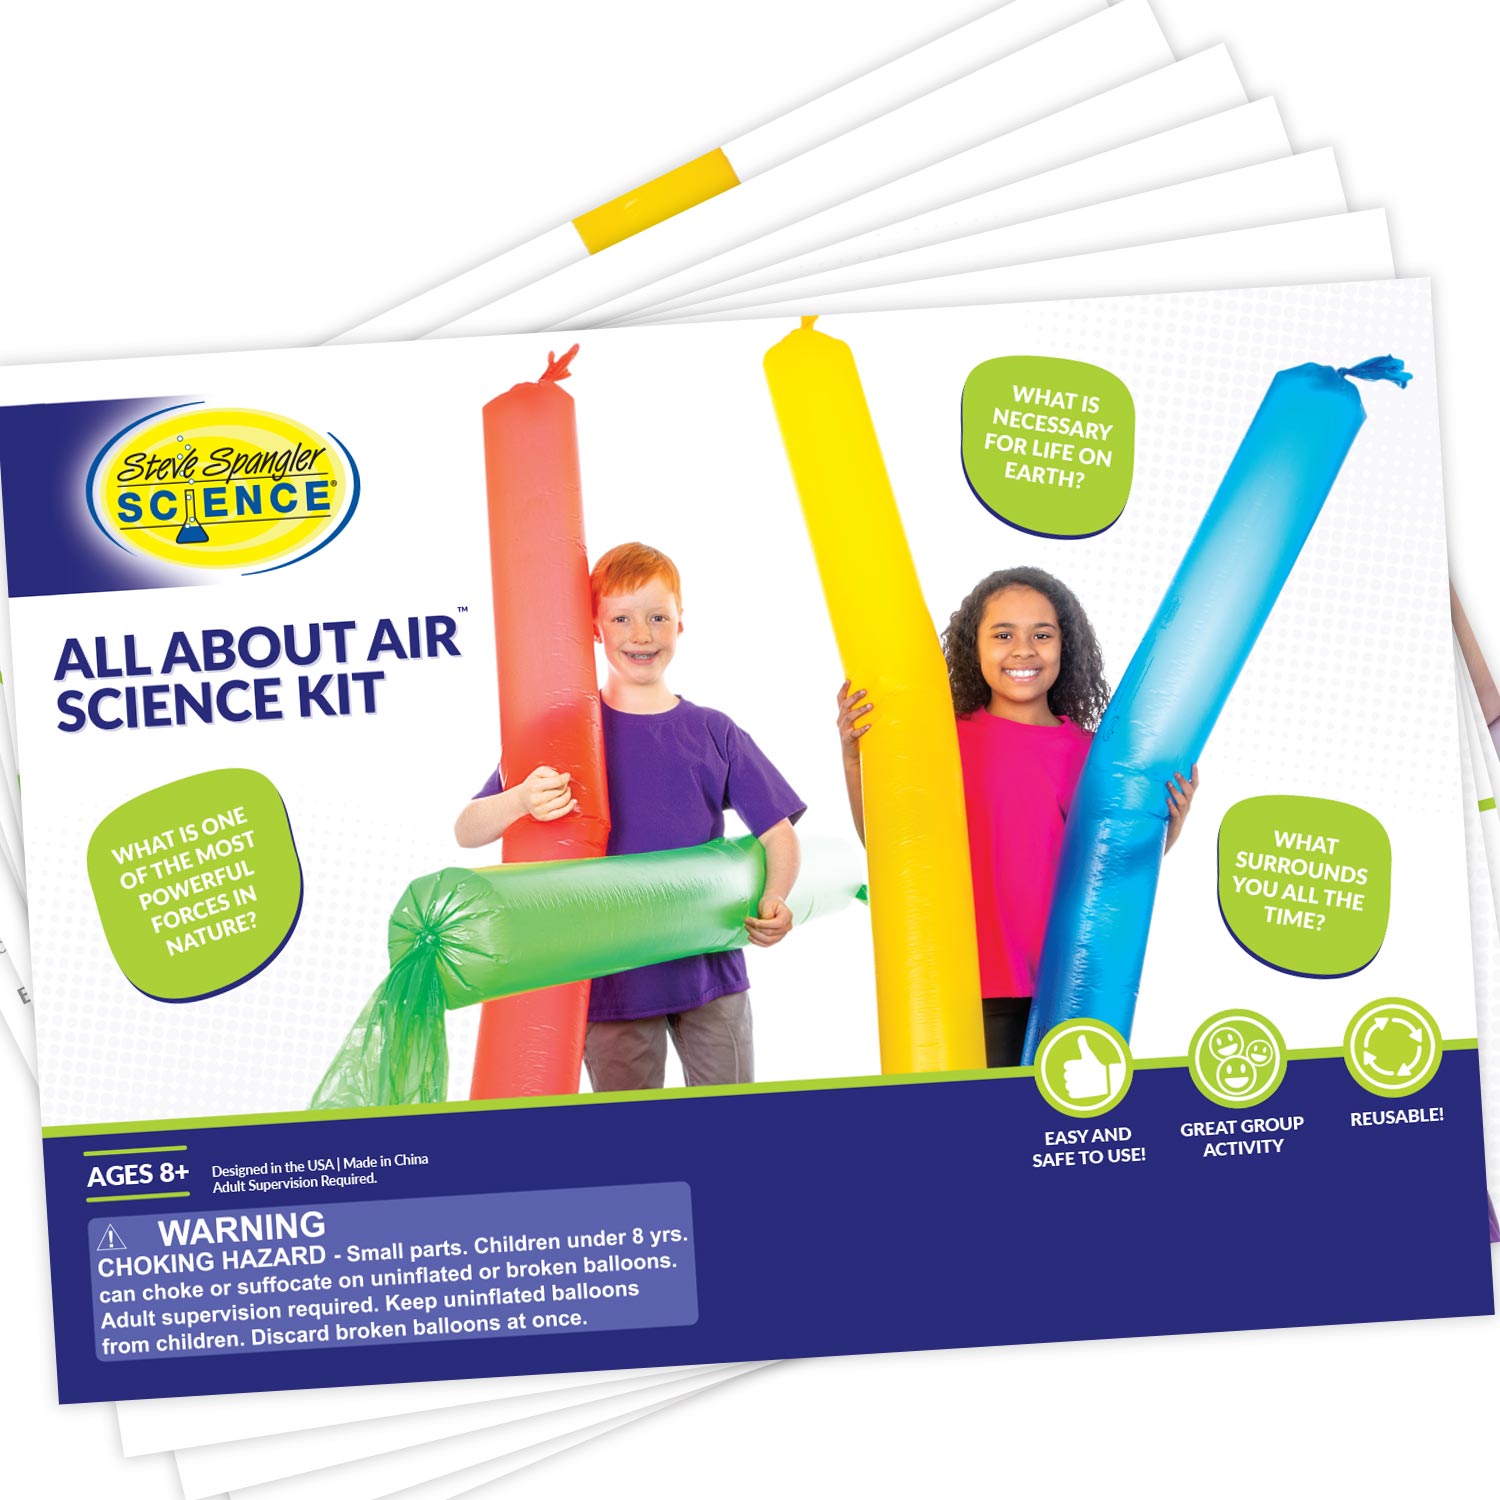 All About Air Science Kit